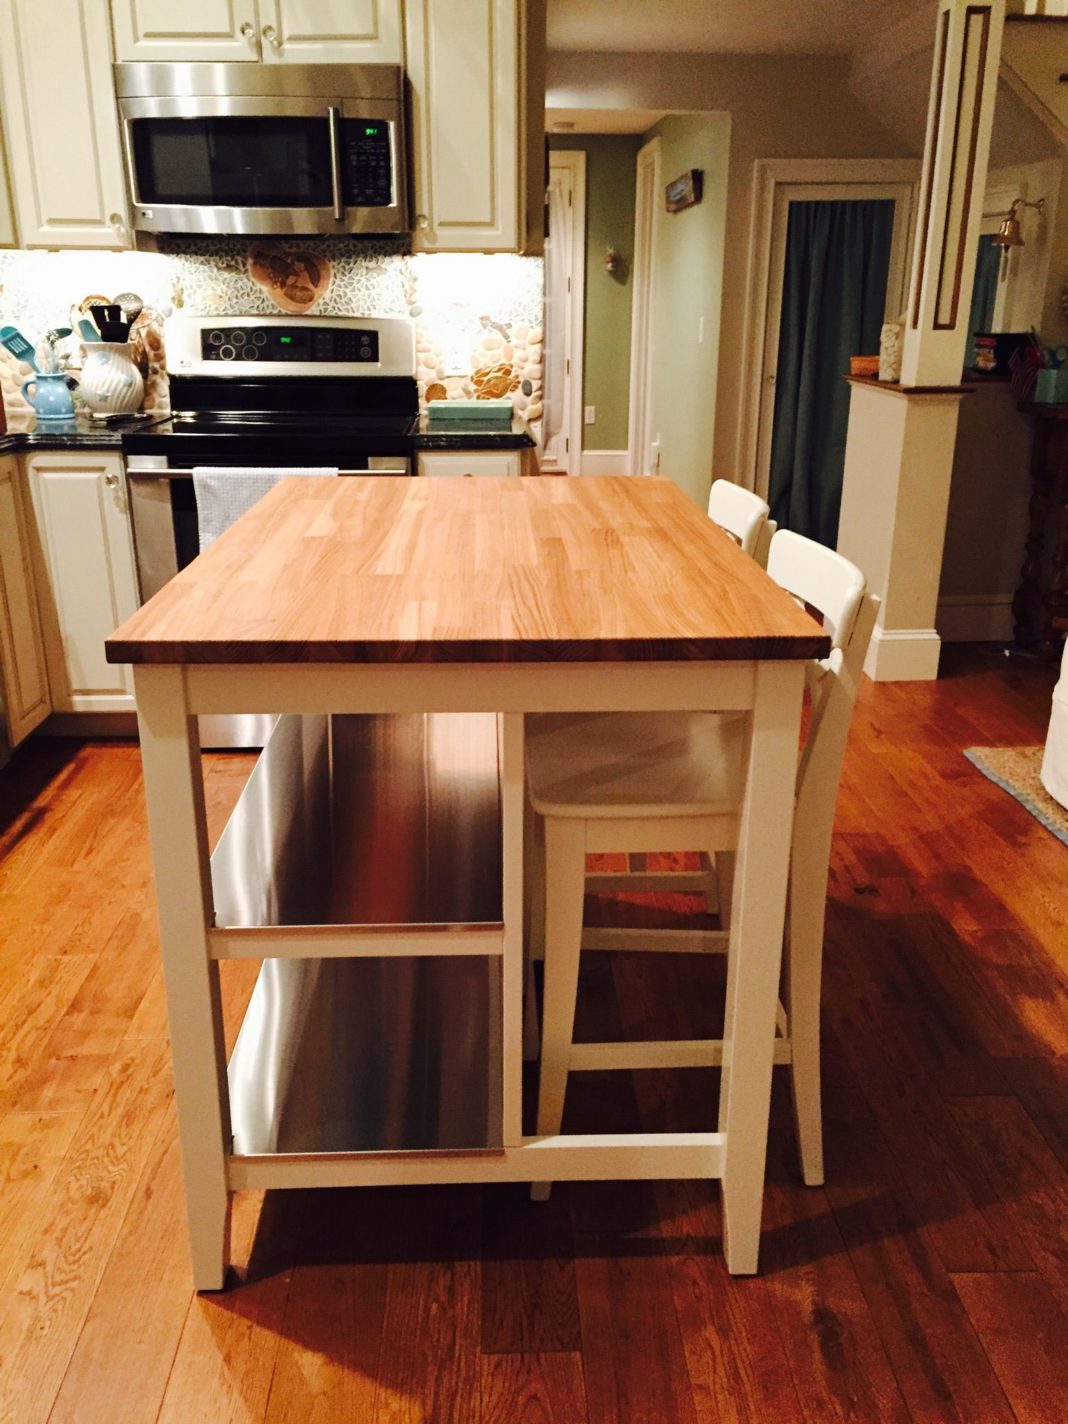 We added some more workspace to our little kitchen with this ikea island (stenst...